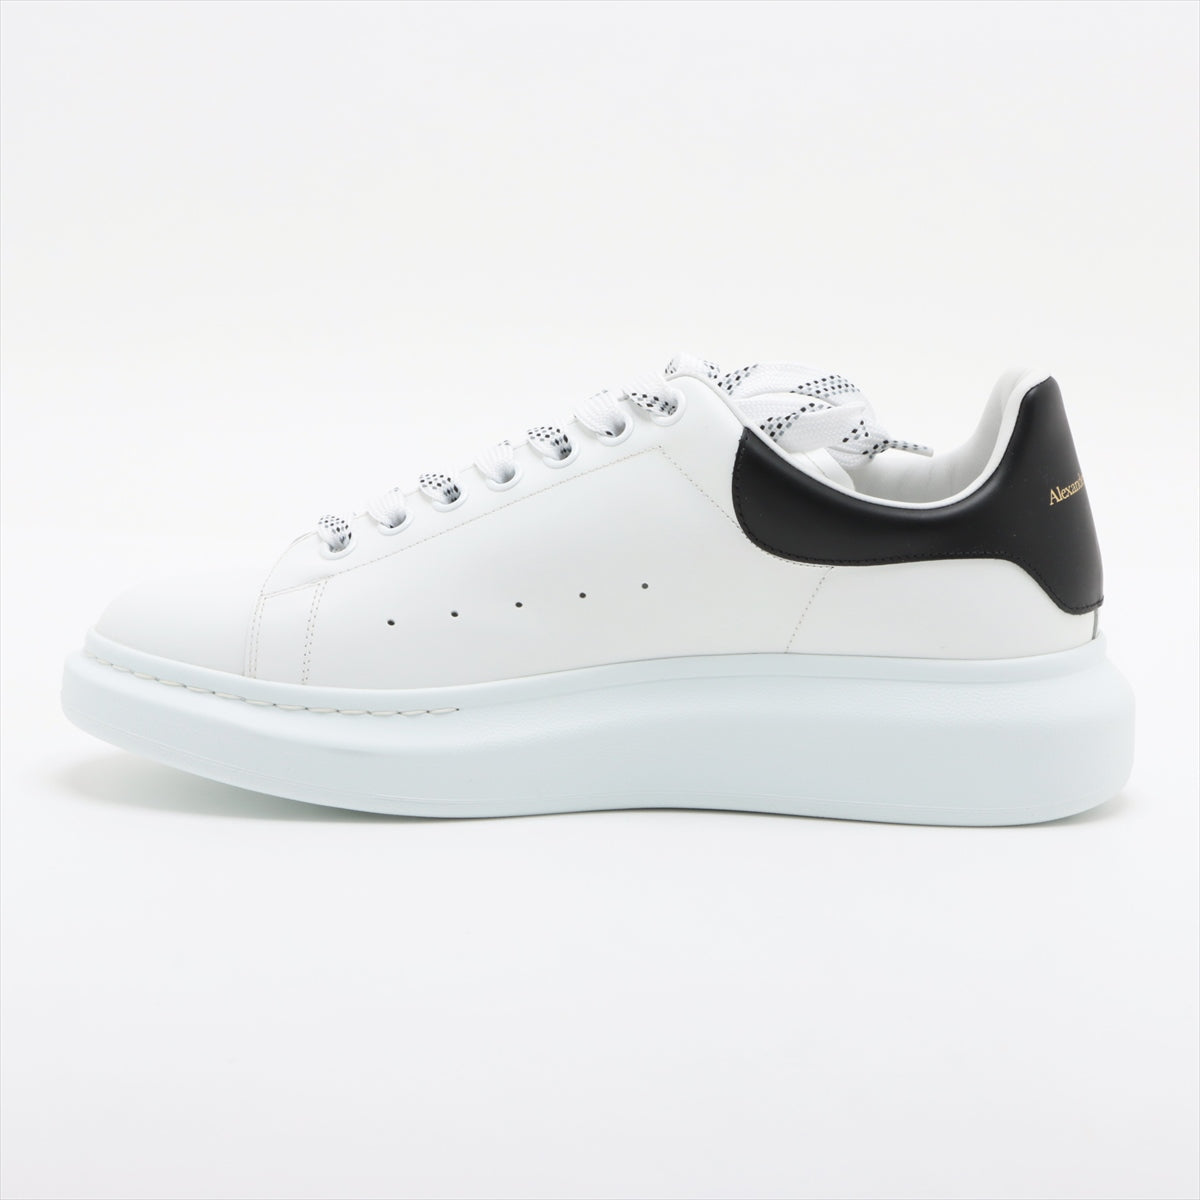 Alexander McQueen Leather Sneakers 43 Men's Black × White 553680  Is there a replacement string